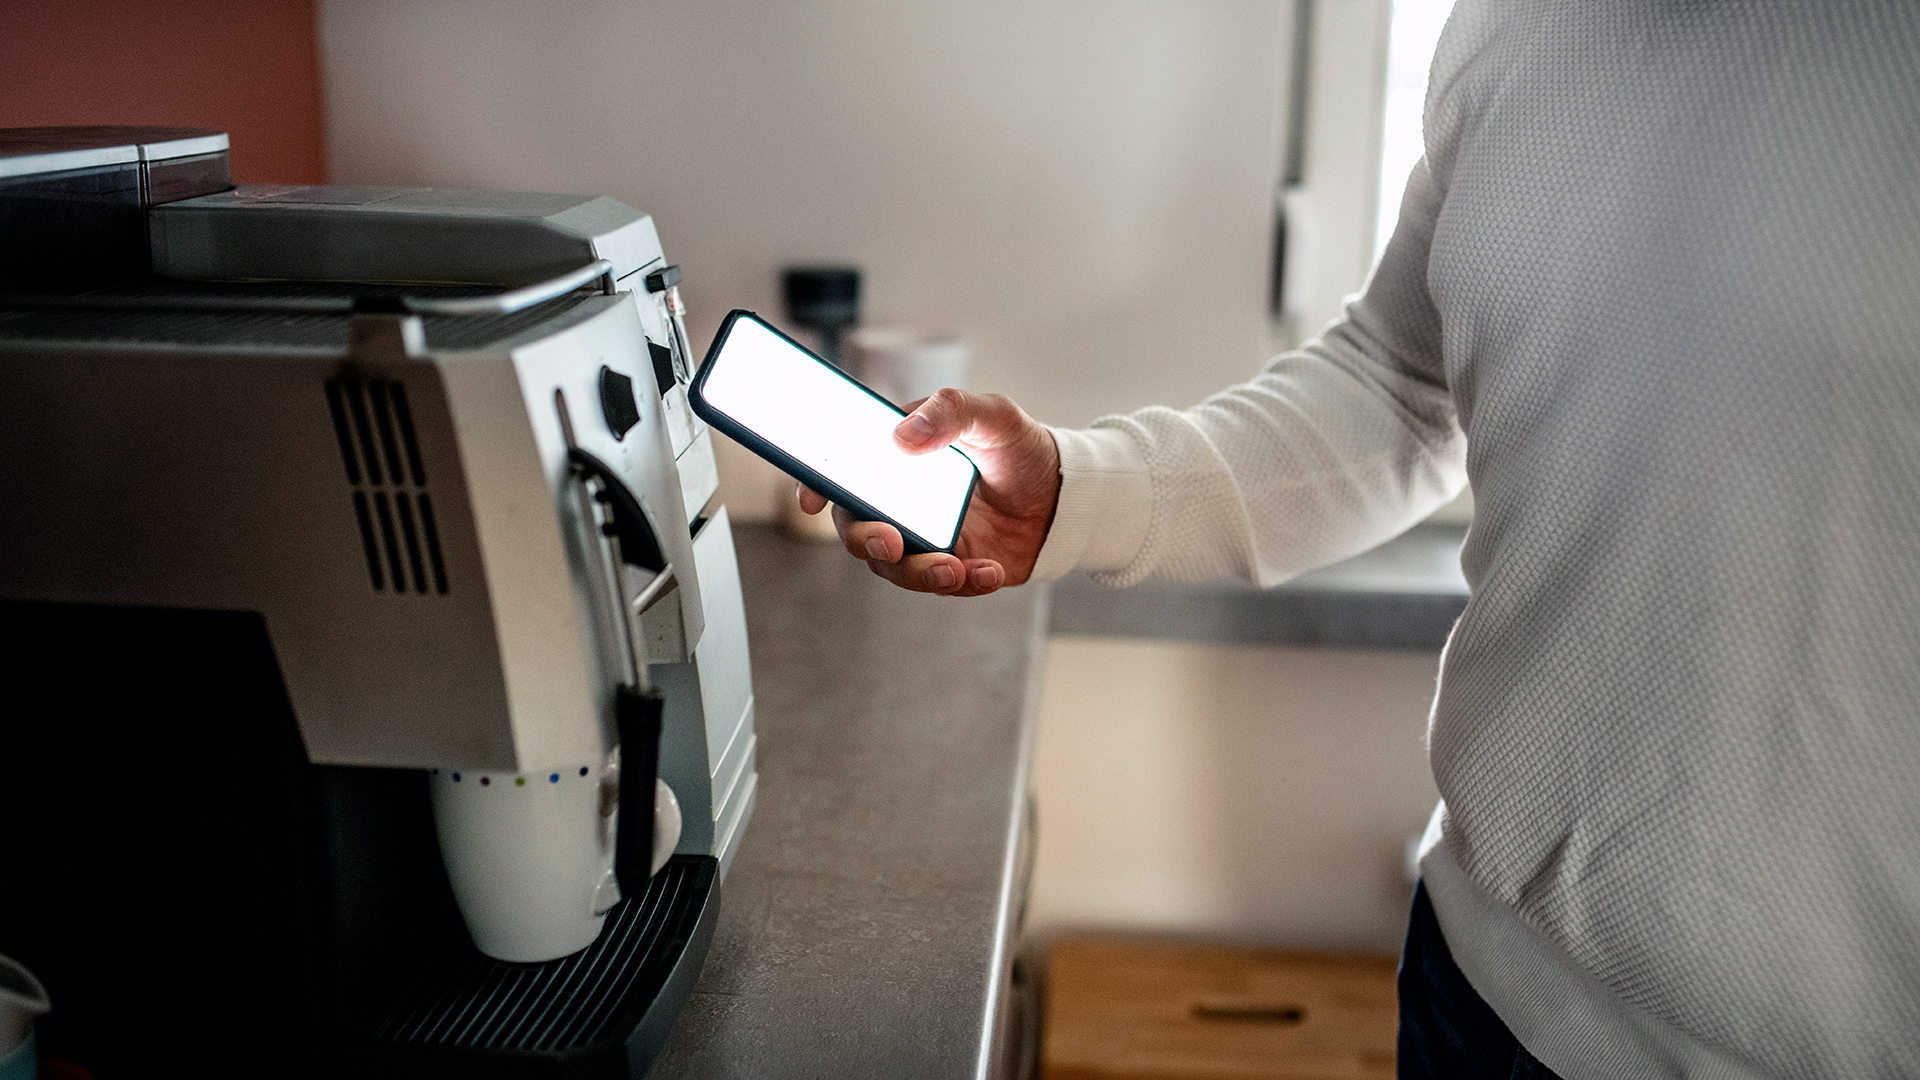 A person uses their smart phone app to control the coffee machine to make a coffee.